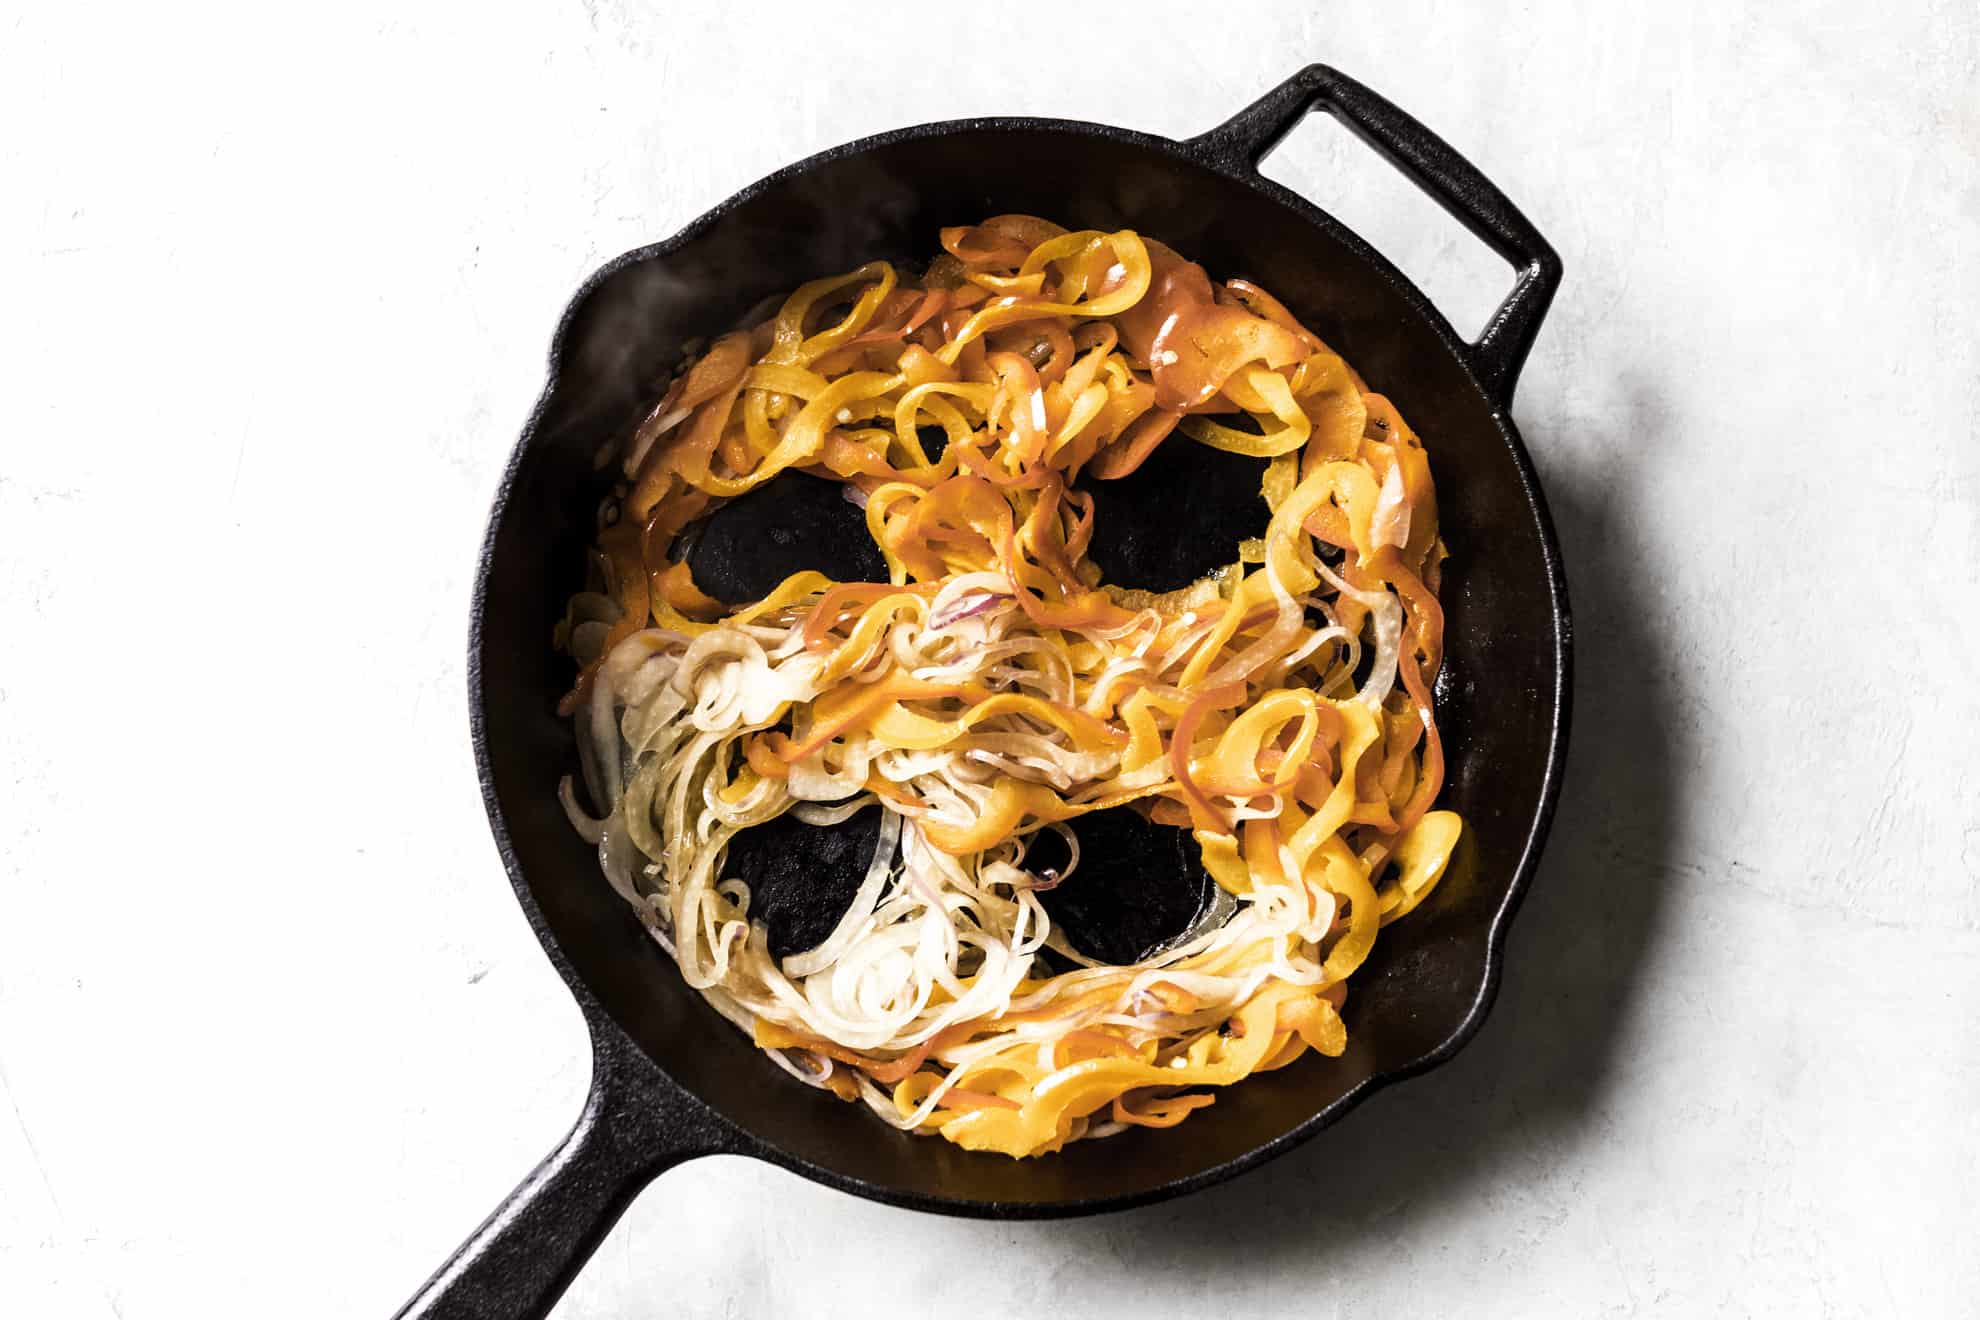 This is an overhead image of a cast iron skillet on a white surface. Inside the skillet is cooked peppers and onions with four divots for eggs to eb cracked in. 